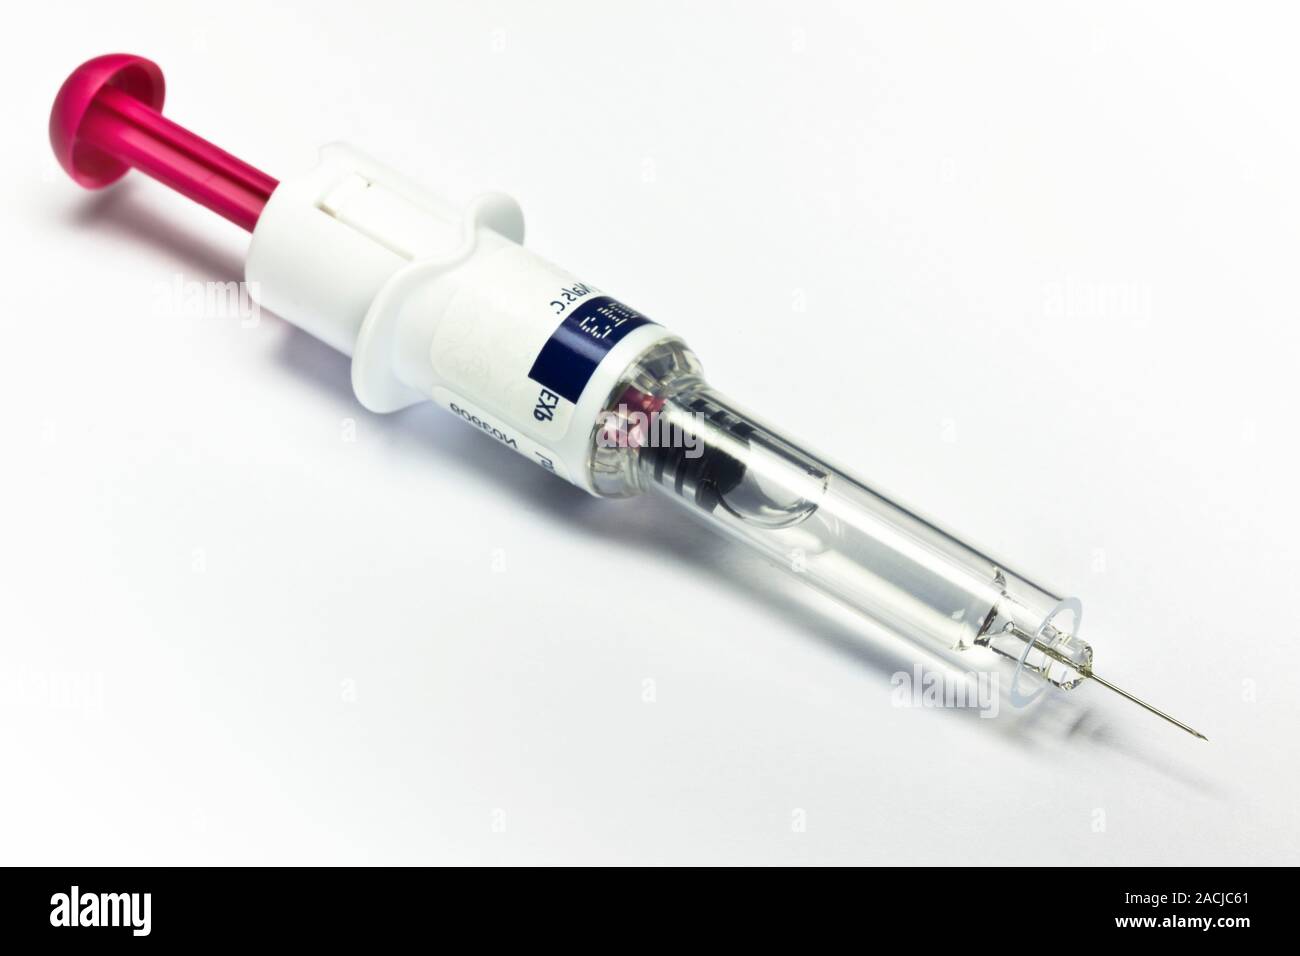 Syringe containing a sterile solution of Fondaparinux (trade name Arixtra).  This is an anticoagulant drug used for the treatment of deep vein thrombos  Stock Photo - Alamy